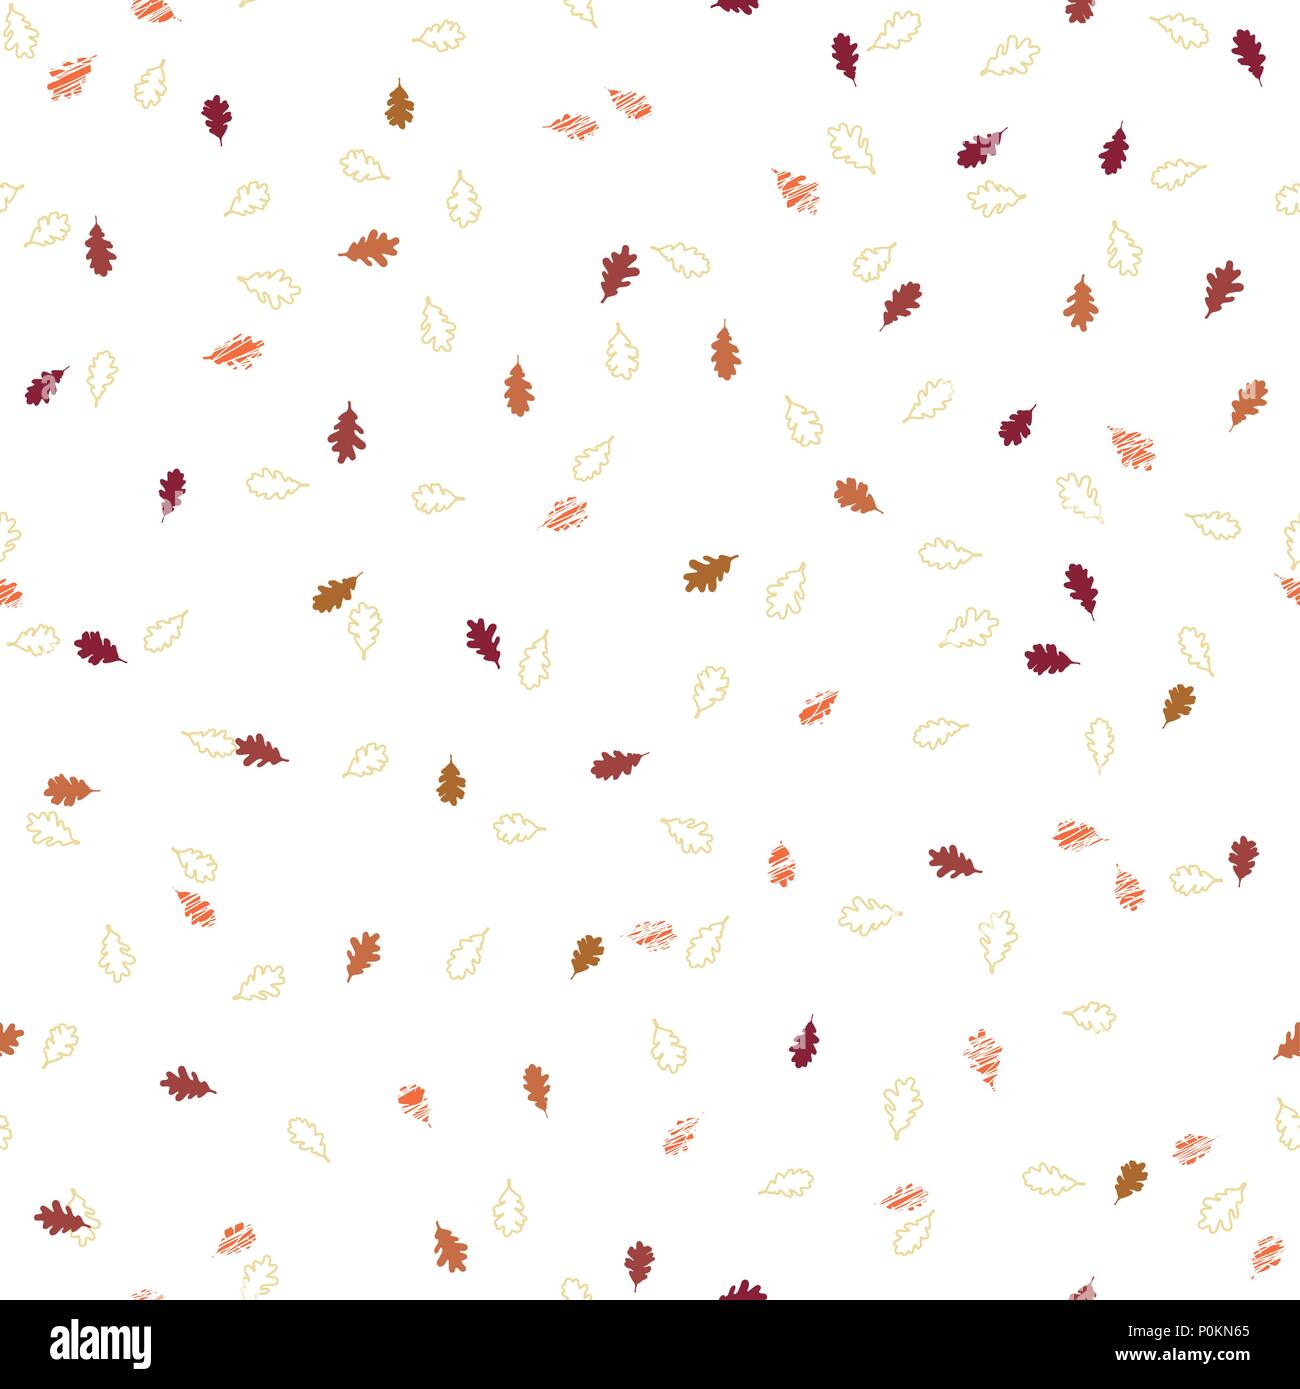 Nice  simple fall background I made with some clipart  riphonewallpapers